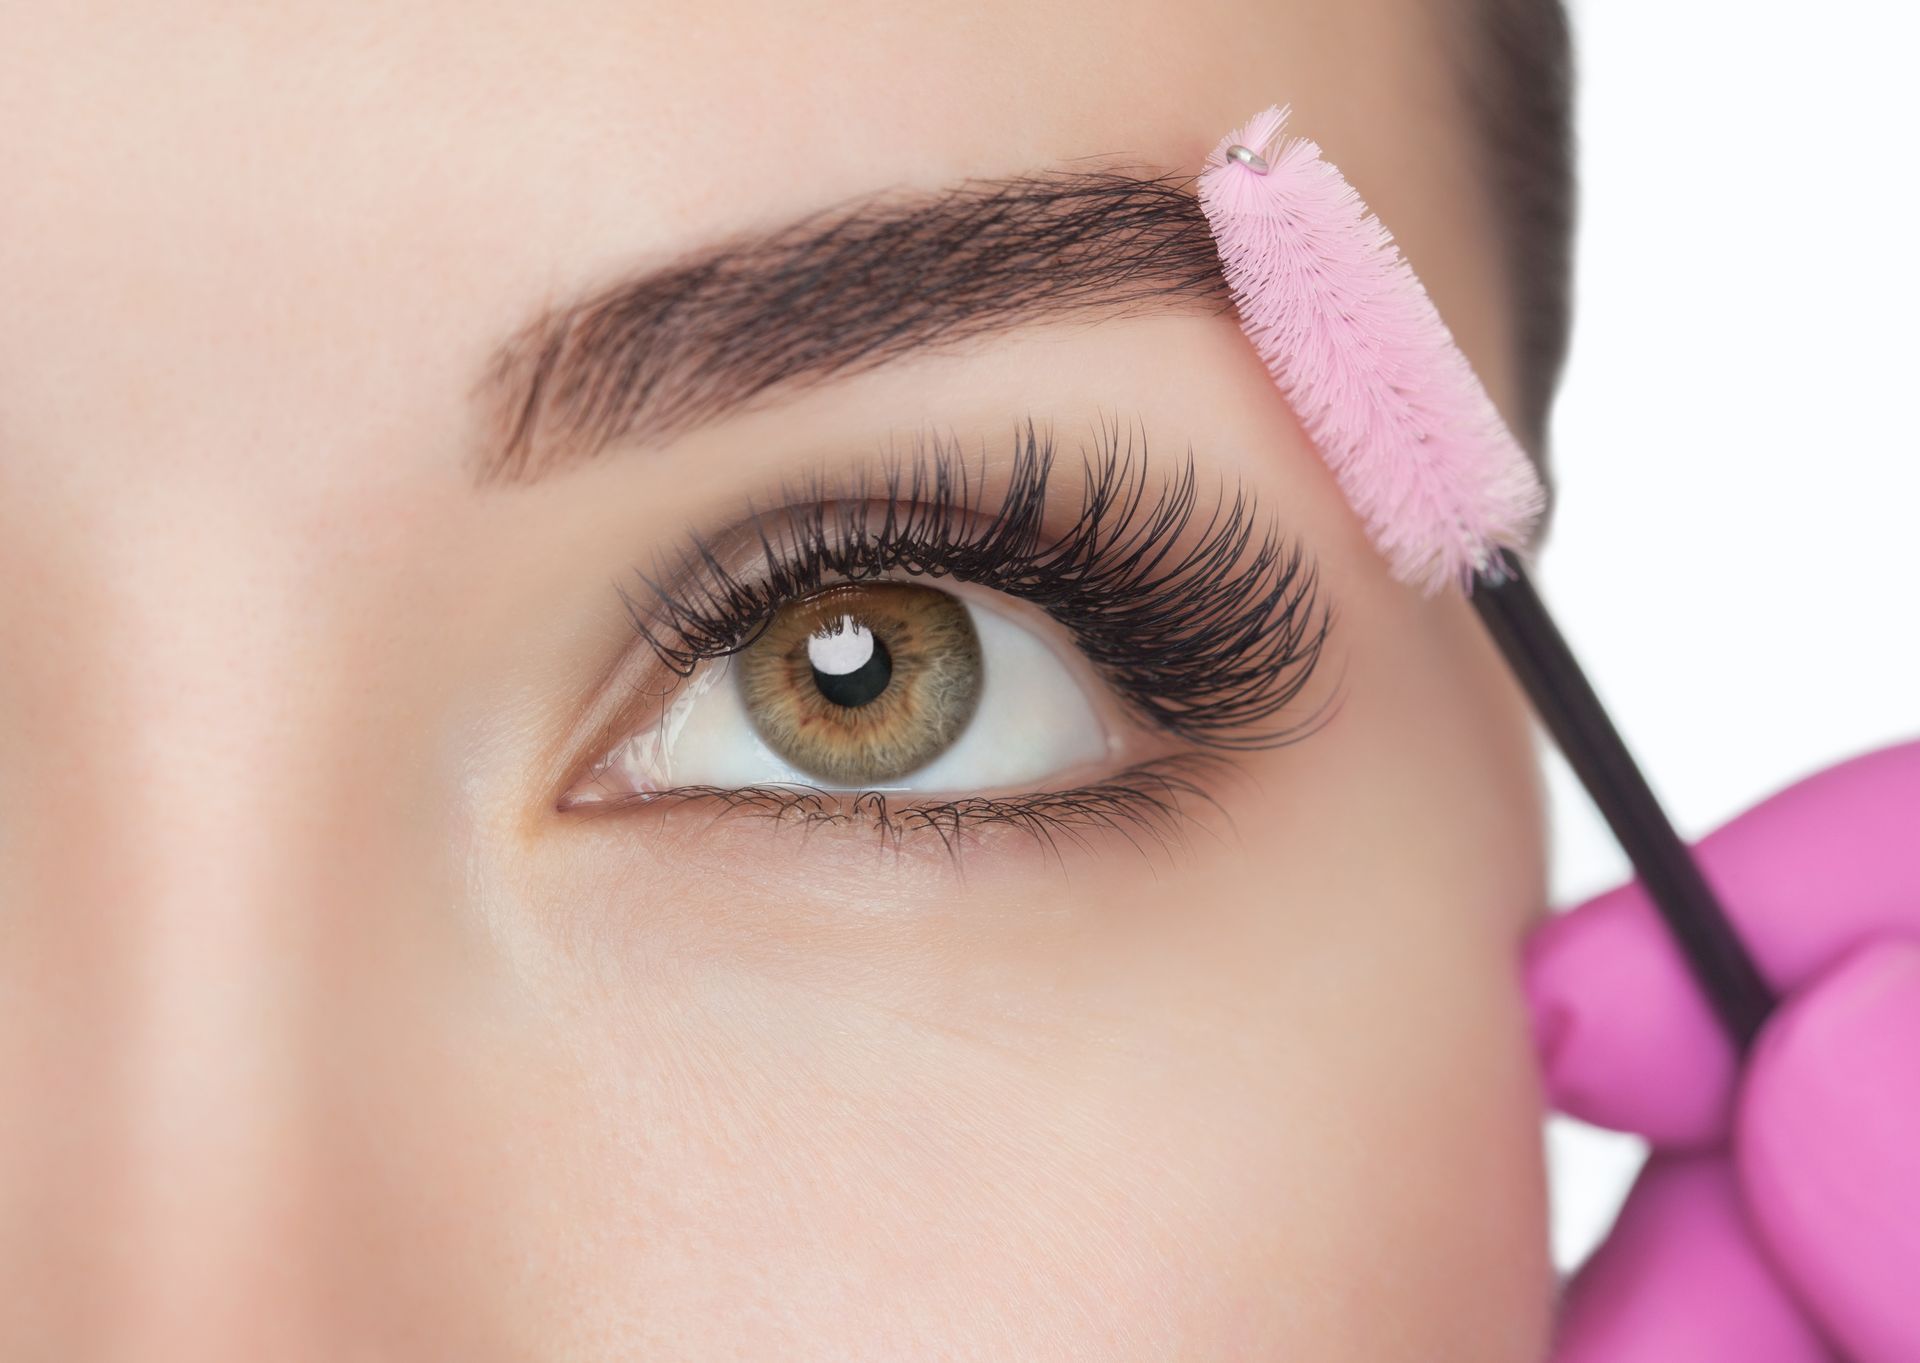 a woman 's eye is being brushed with a pink brush